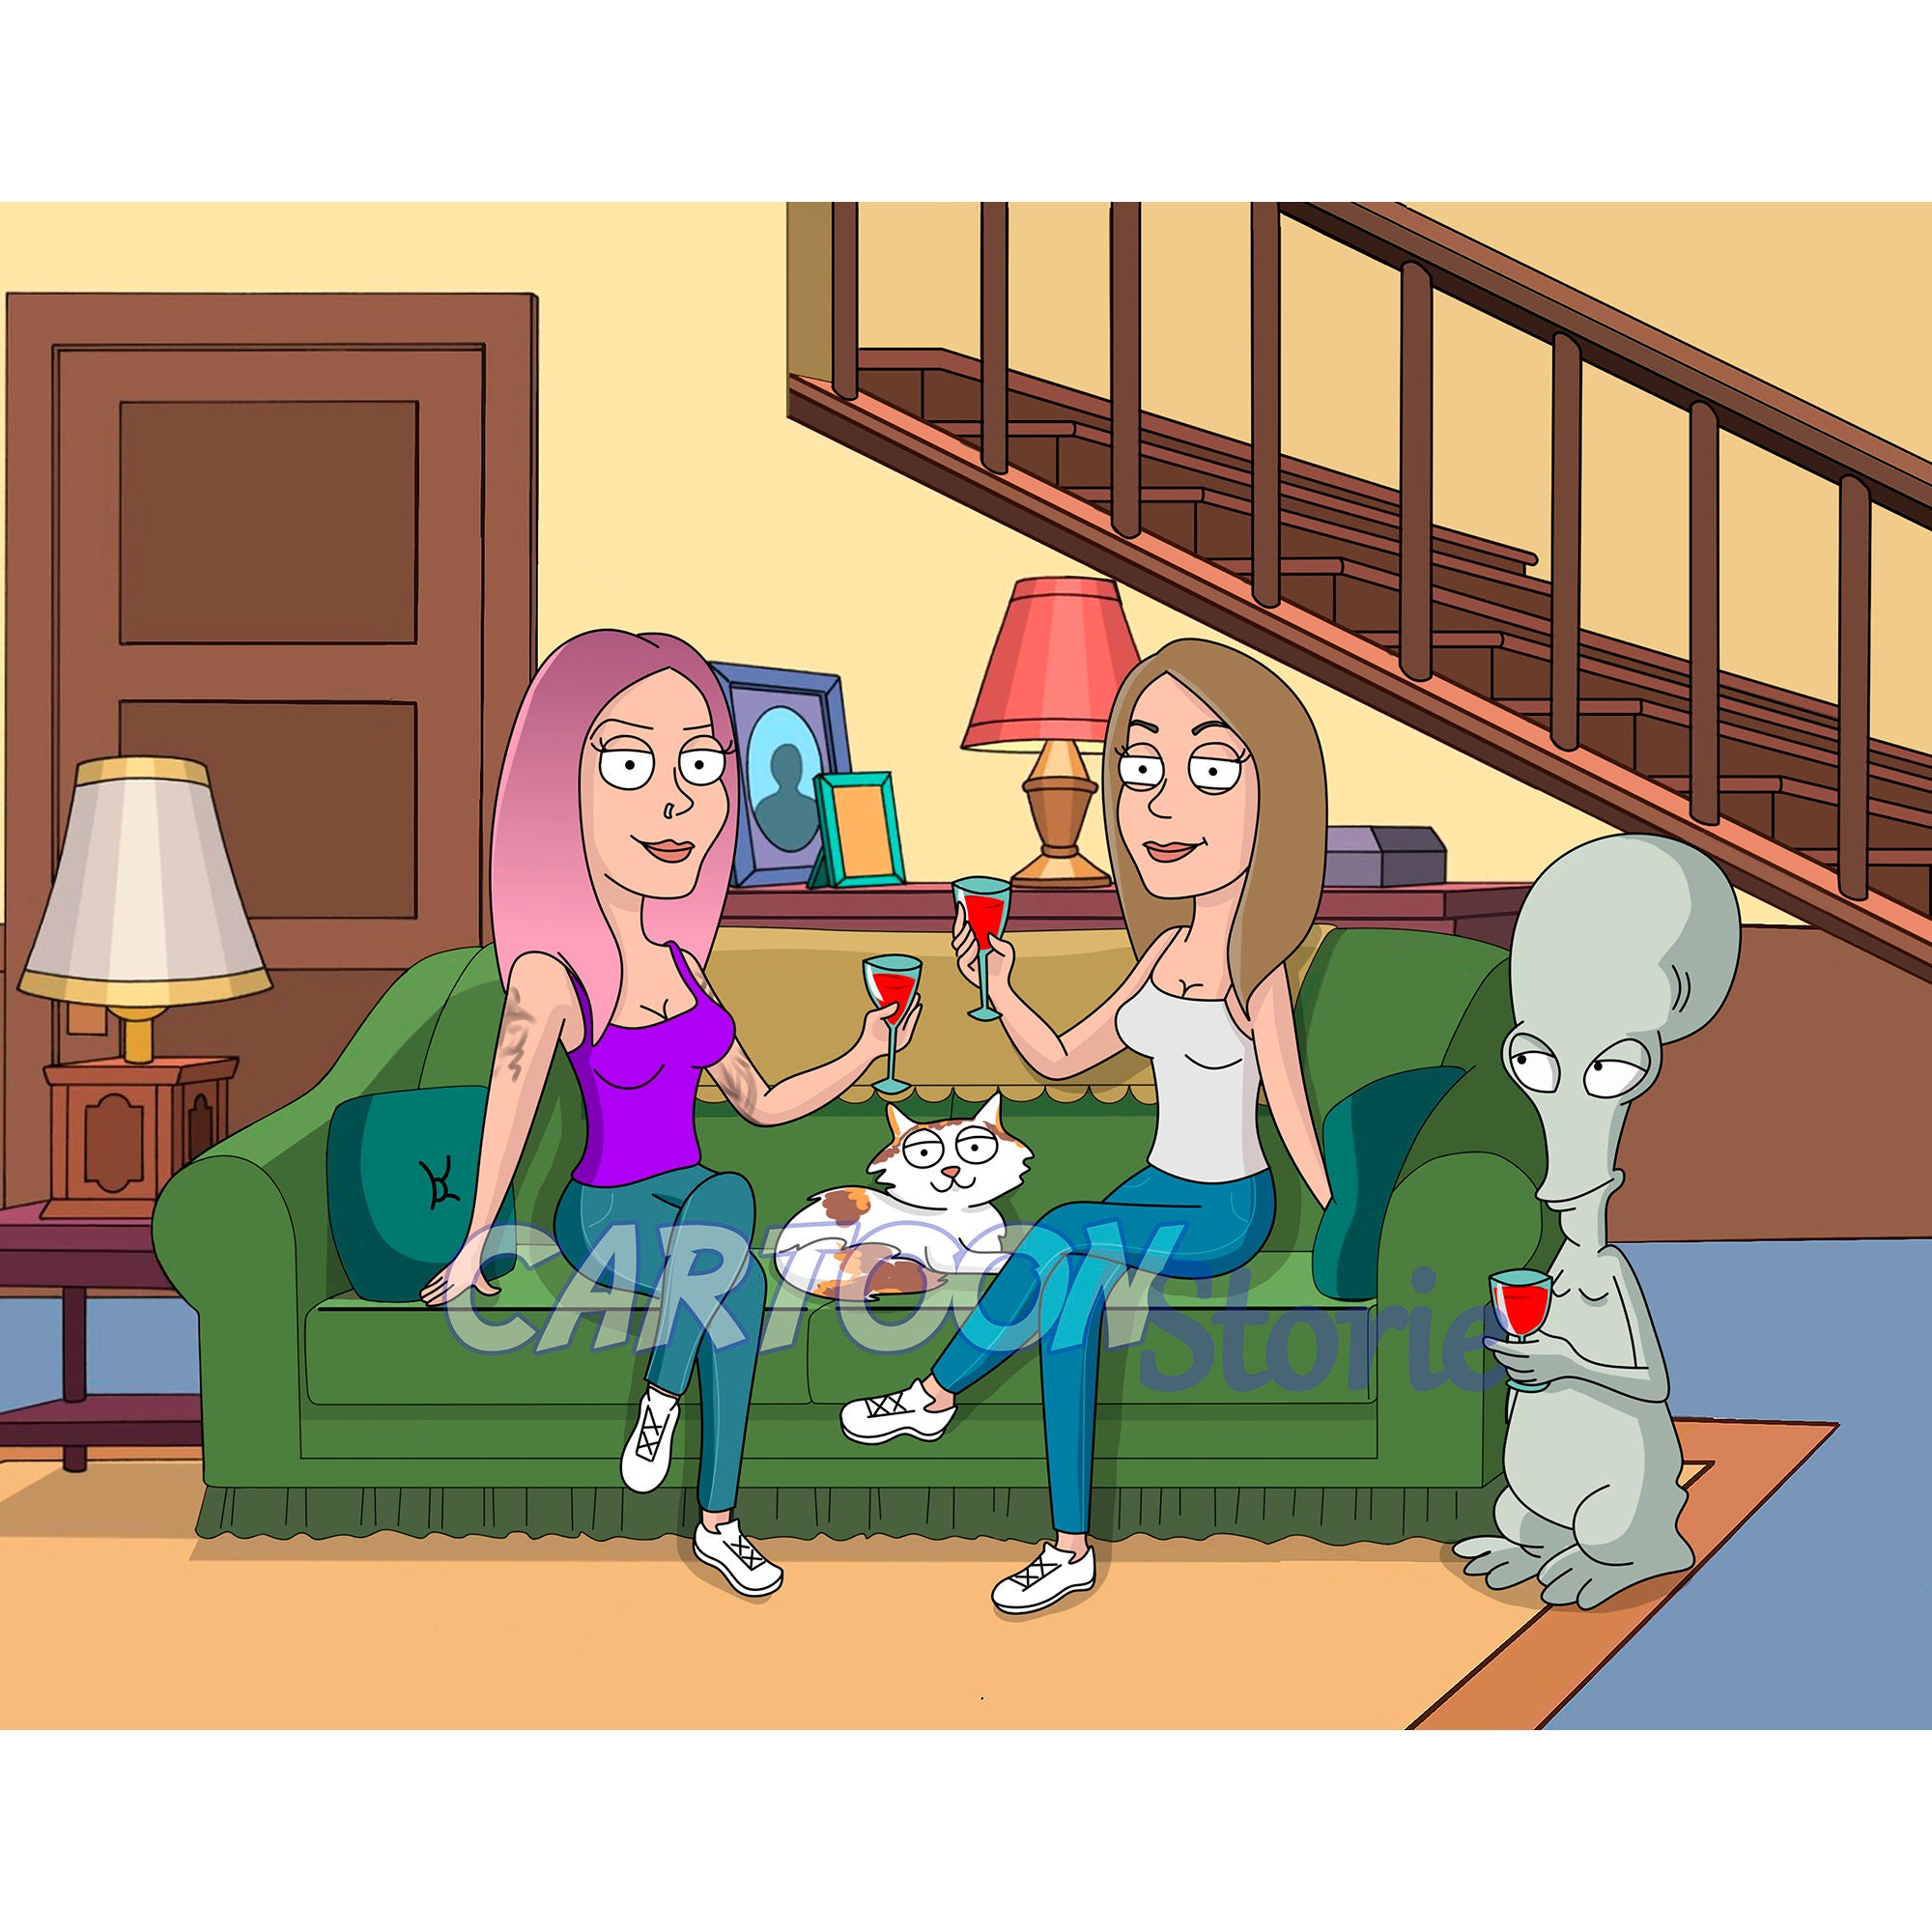 American Dad! Gifts & Merchandise